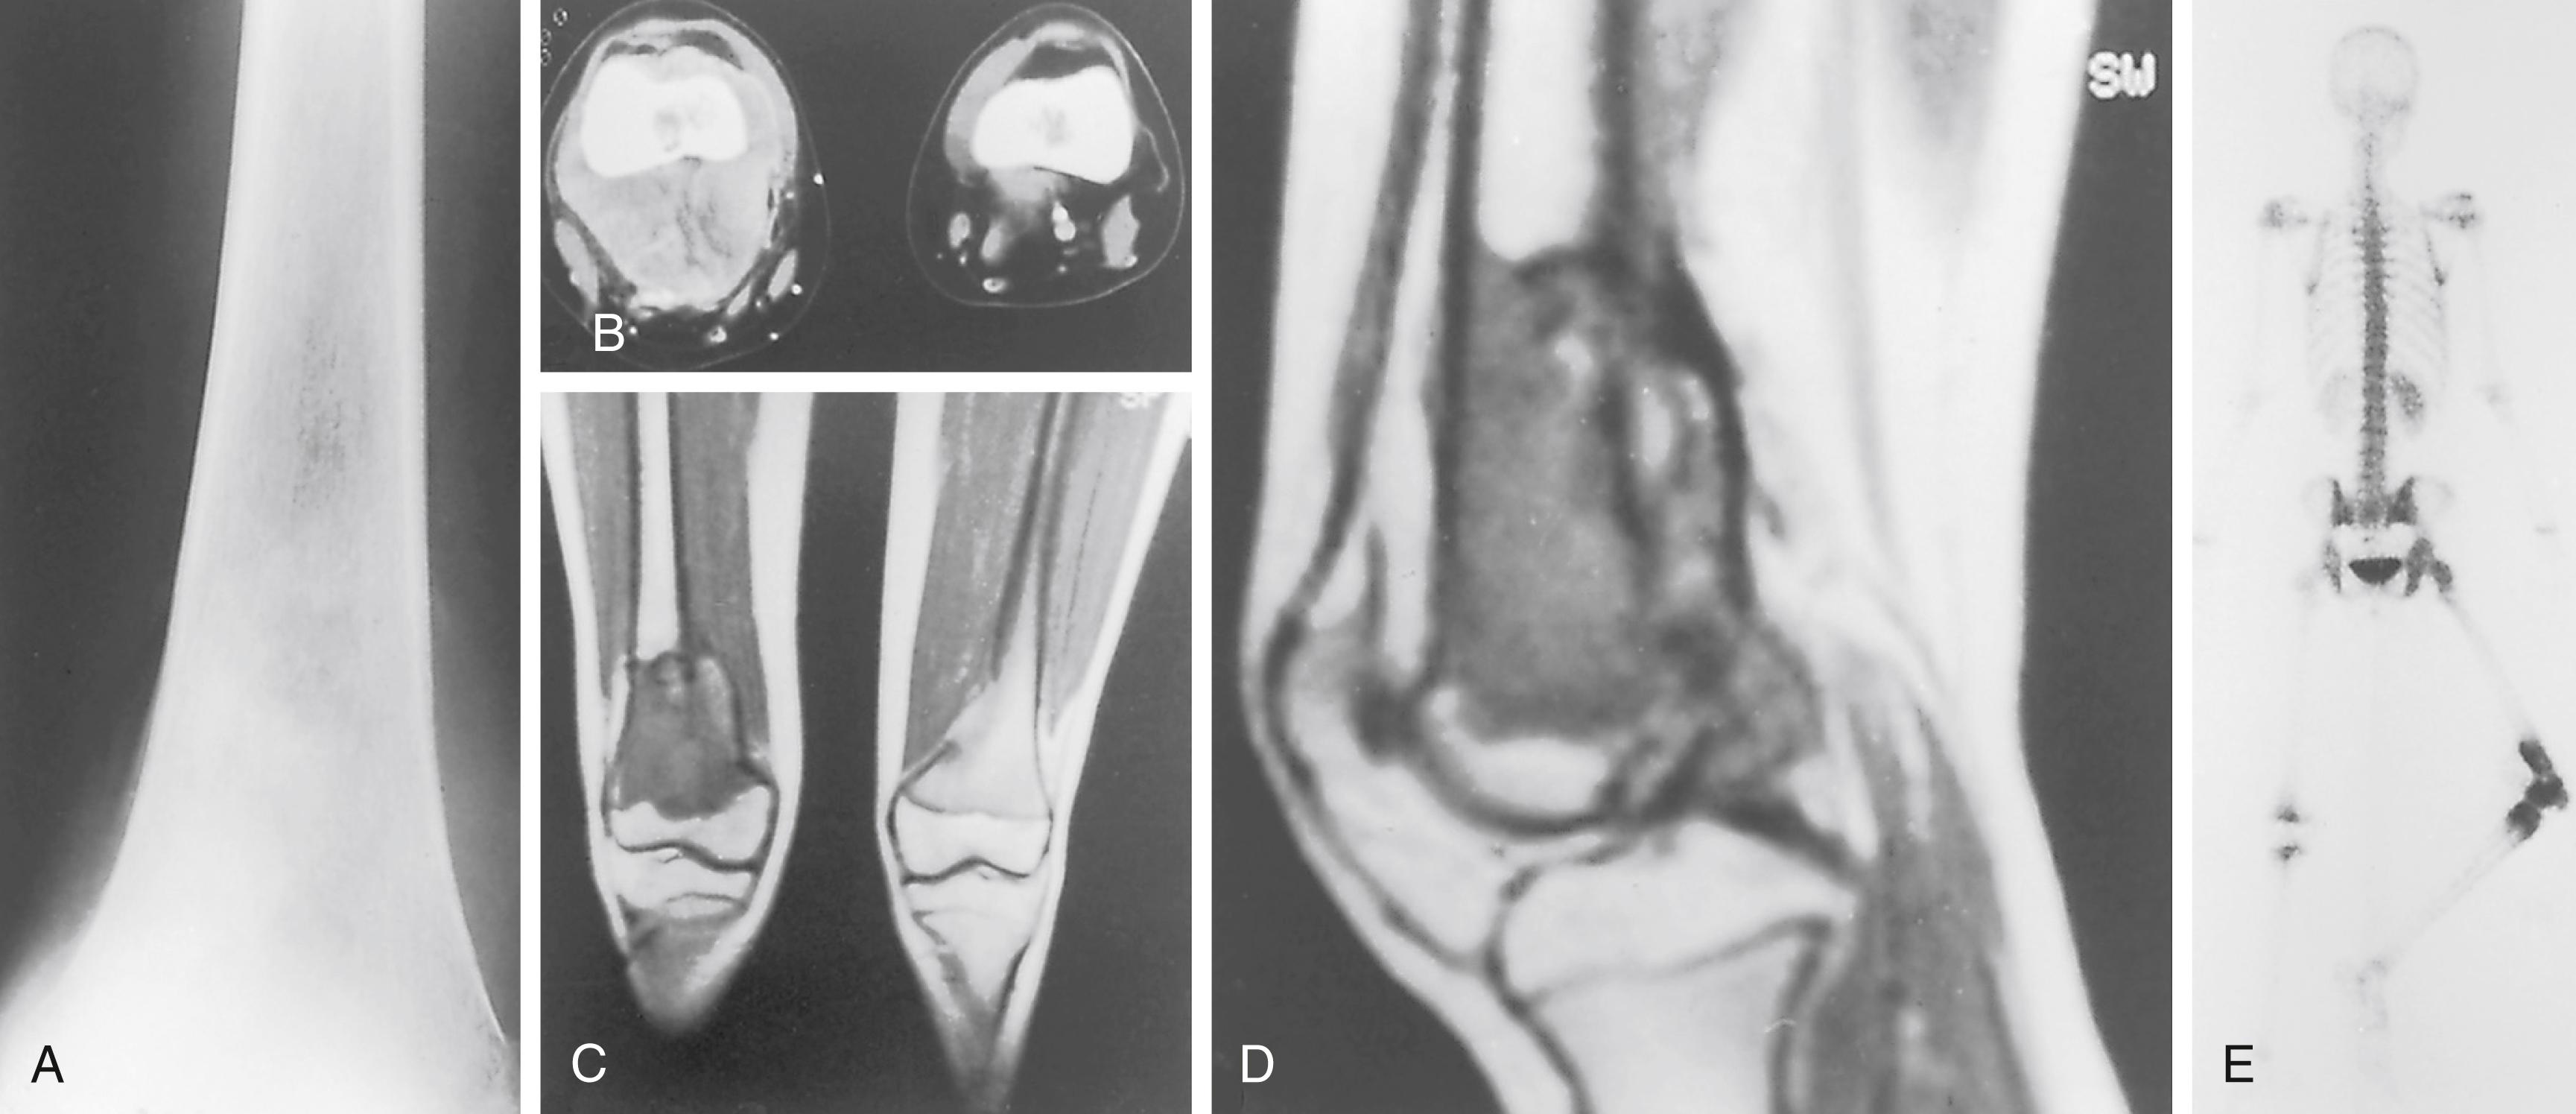 FIG. 26.8, Osteosarcoma of the left distal femur. (A) Plain anteroposterior radiograph. Note the distal metaphyseal and lower diaphyseal sclerotic lesion. (B) CT scan showing bone-forming tumor. (C and D) MRI scans showing the extent of the tumor and its relationship to the popliteal soft tissue. (E) Bone scan with technetium-99m showing increased uptake in the distal femoral metaphyseal region. CT , Computed tomography; MRI , magnetic resonance imaging.